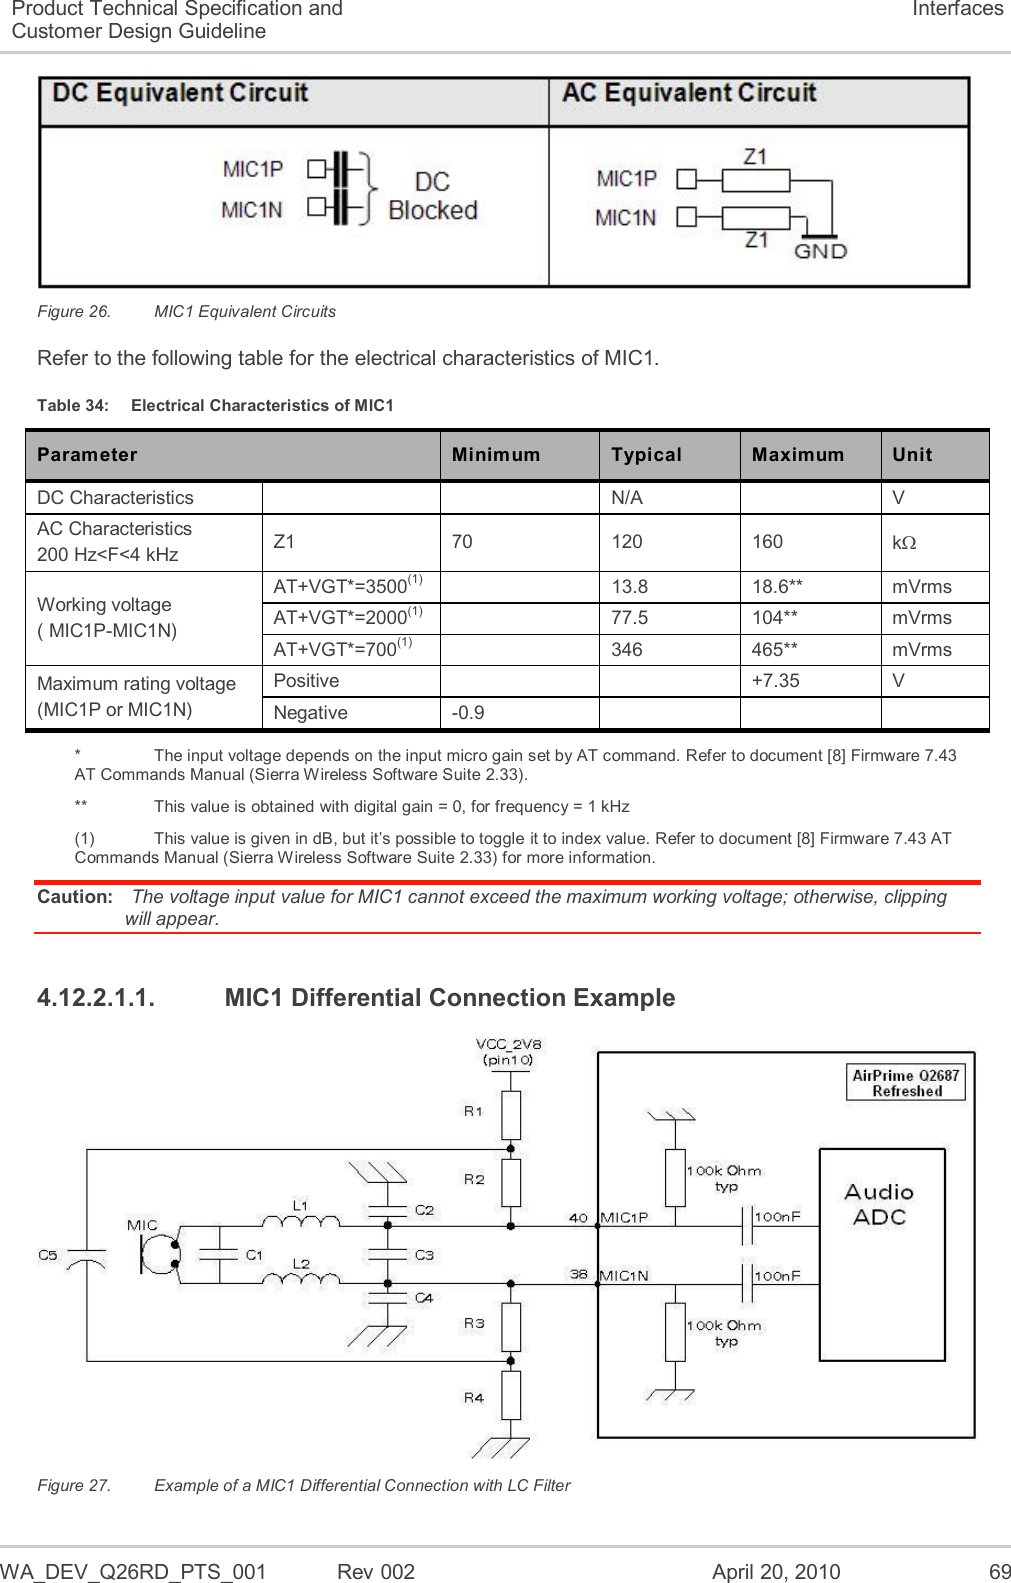  WA_DEV_Q26RD_PTS_001  Rev 002  April 20, 2010 69 Product Technical Specification and Customer Design Guideline Interfaces  Figure 26.  MIC1 Equivalent Circuits Refer to the following table for the electrical characteristics of MIC1. Table 34:  Electrical Characteristics of MIC1 Parameter Minimum Typical Maximum Unit DC Characteristics   N/A  V AC Characteristics 200 Hz&lt;F&lt;4 kHz Z1 70 120 160 k Working voltage  ( MIC1P-MIC1N) AT+VGT*=3500(1)  13.8 18.6** mVrms AT+VGT*=2000(1)  77.5 104** mVrms AT+VGT*=700(1)  346 465** mVrms Maximum rating voltage (MIC1P or MIC1N) Positive   +7.35 V Negative -0.9    *    The input voltage depends on the input micro gain set by AT command. Refer to document [8] Firmware 7.43 AT Commands Manual (Sierra Wireless Software Suite 2.33). **    This value is obtained with digital gain = 0, for frequency = 1 kHz (1)   This value is given in dB, but it’s possible to toggle it to index value. Refer to document [8] Firmware 7.43 AT Commands Manual (Sierra Wireless Software Suite 2.33) for more information. Caution:  The voltage input value for MIC1 cannot exceed the maximum working voltage; otherwise, clipping will appear. 4.12.2.1.1.  MIC1 Differential Connection Example  Figure 27.  Example of a MIC1 Differential Connection with LC Filter 